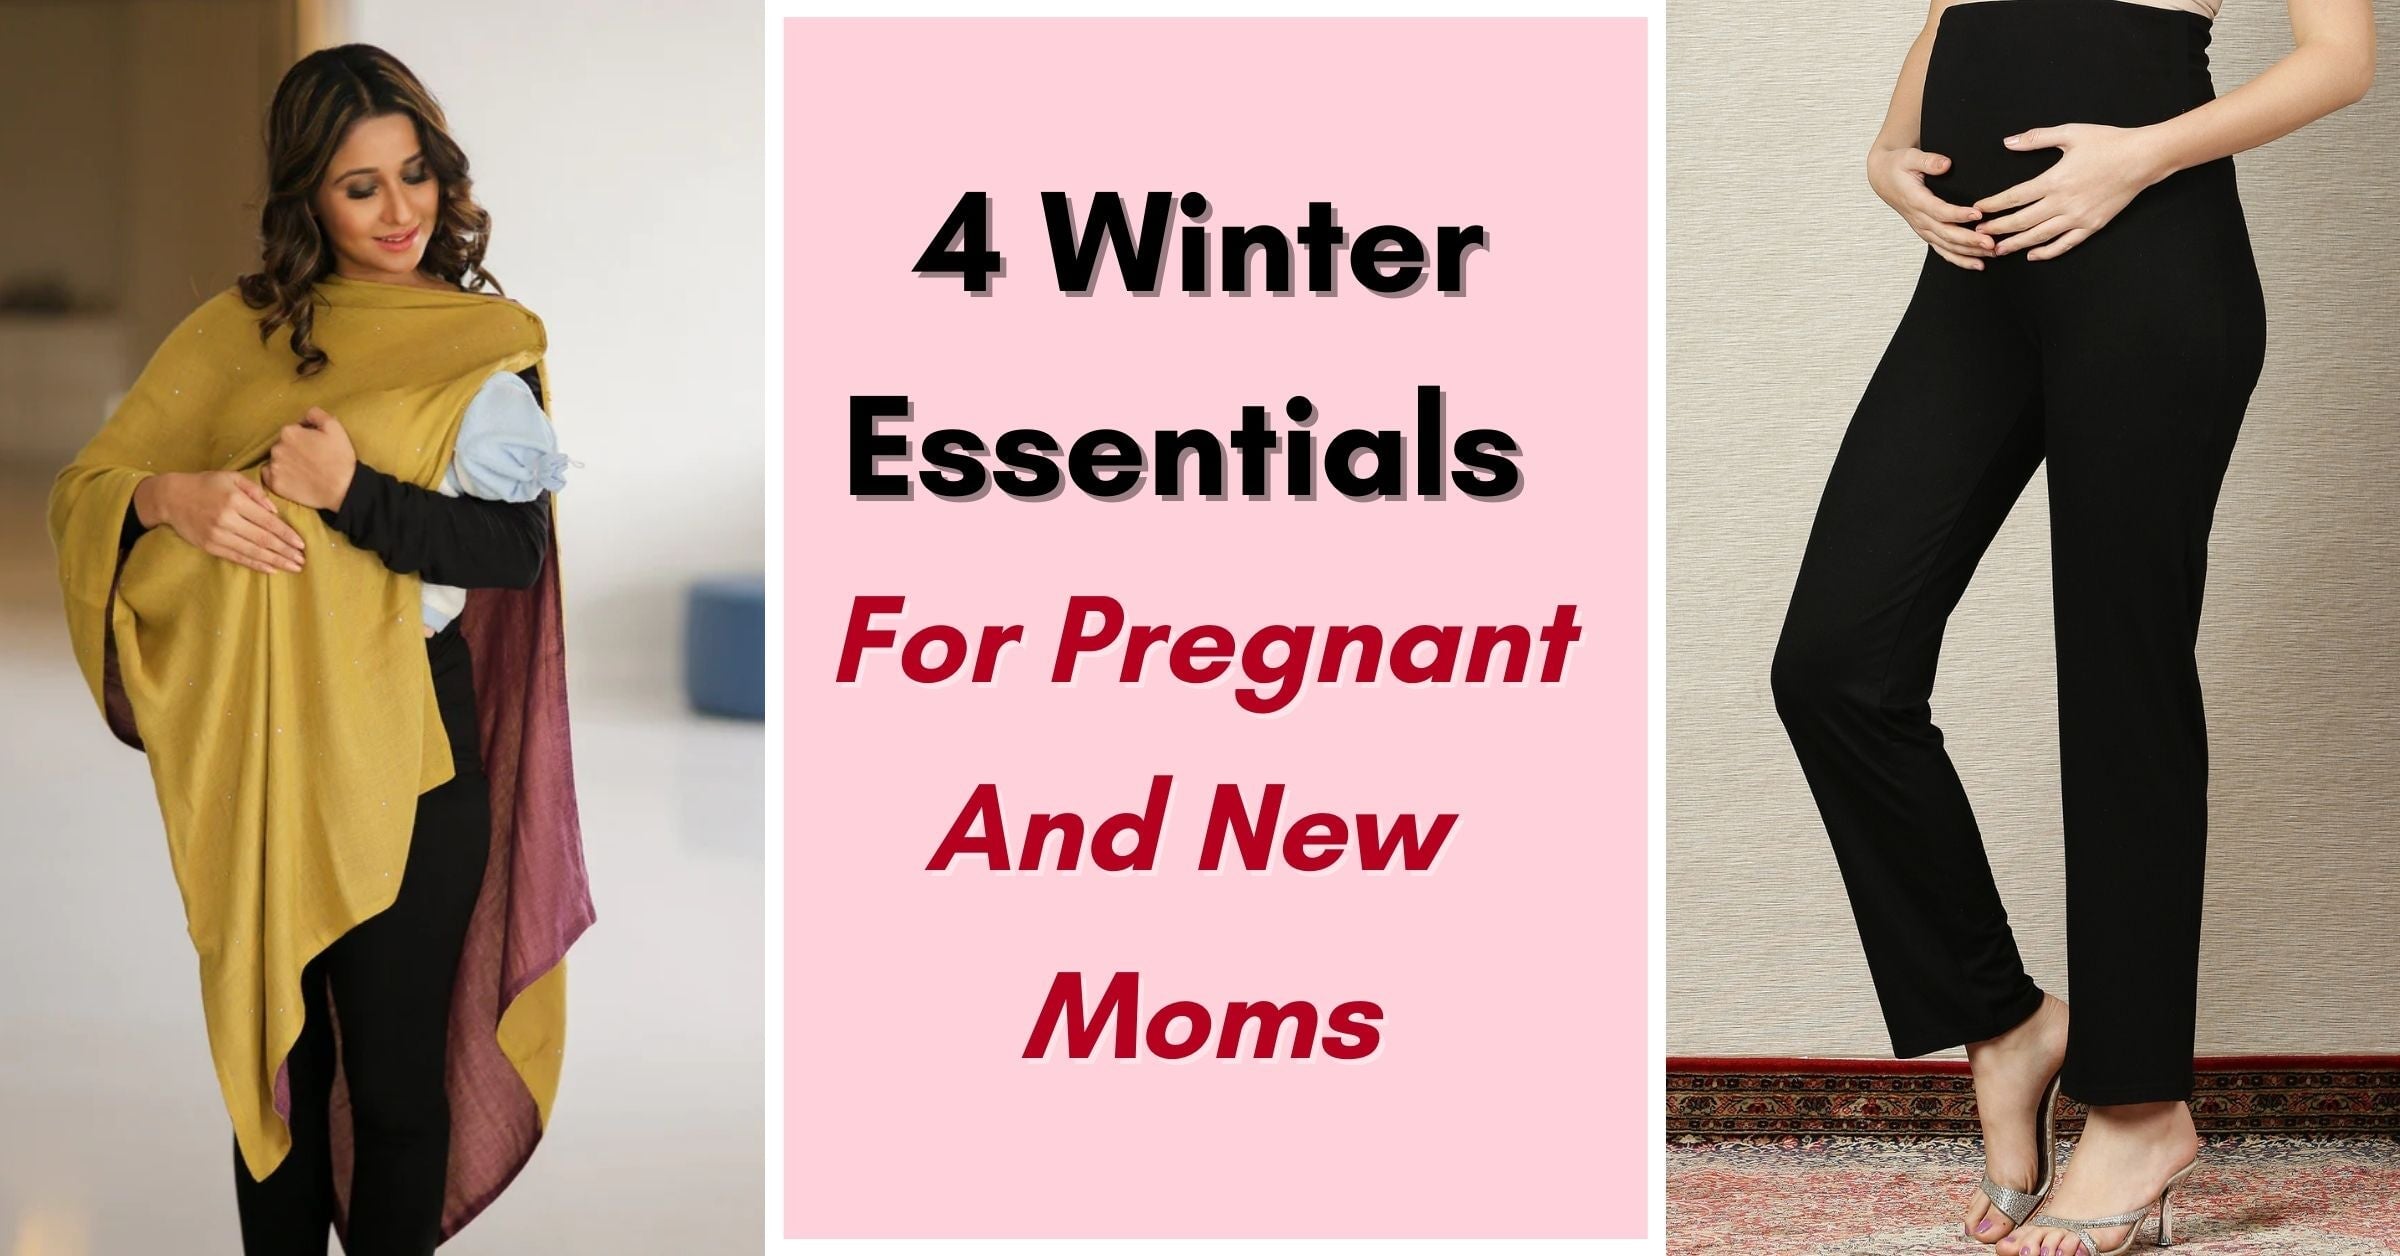 4 Winter Essentials For Pregnant And New Moms